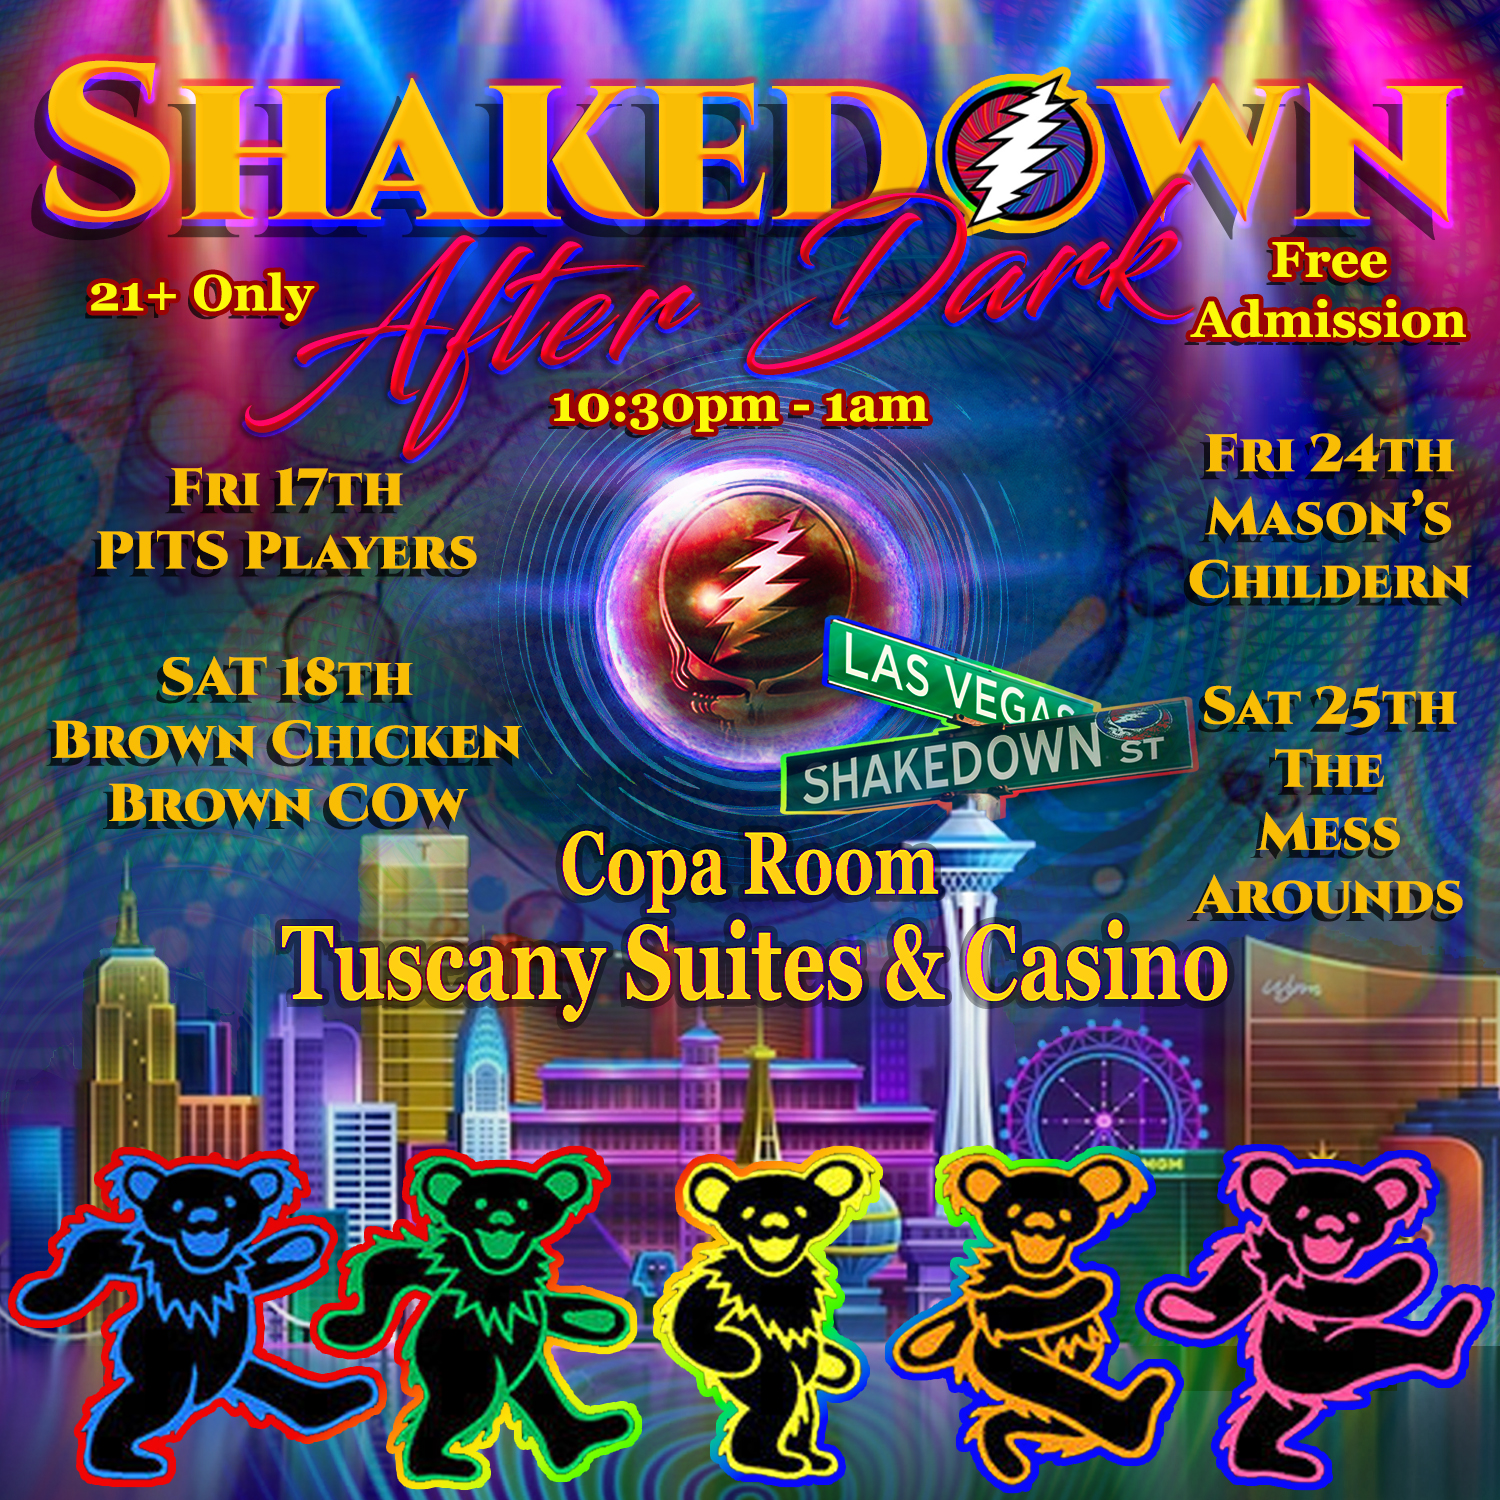 Shakedown Vegas Announces Exciting Band lineups for Pre-Concert and After Concert events